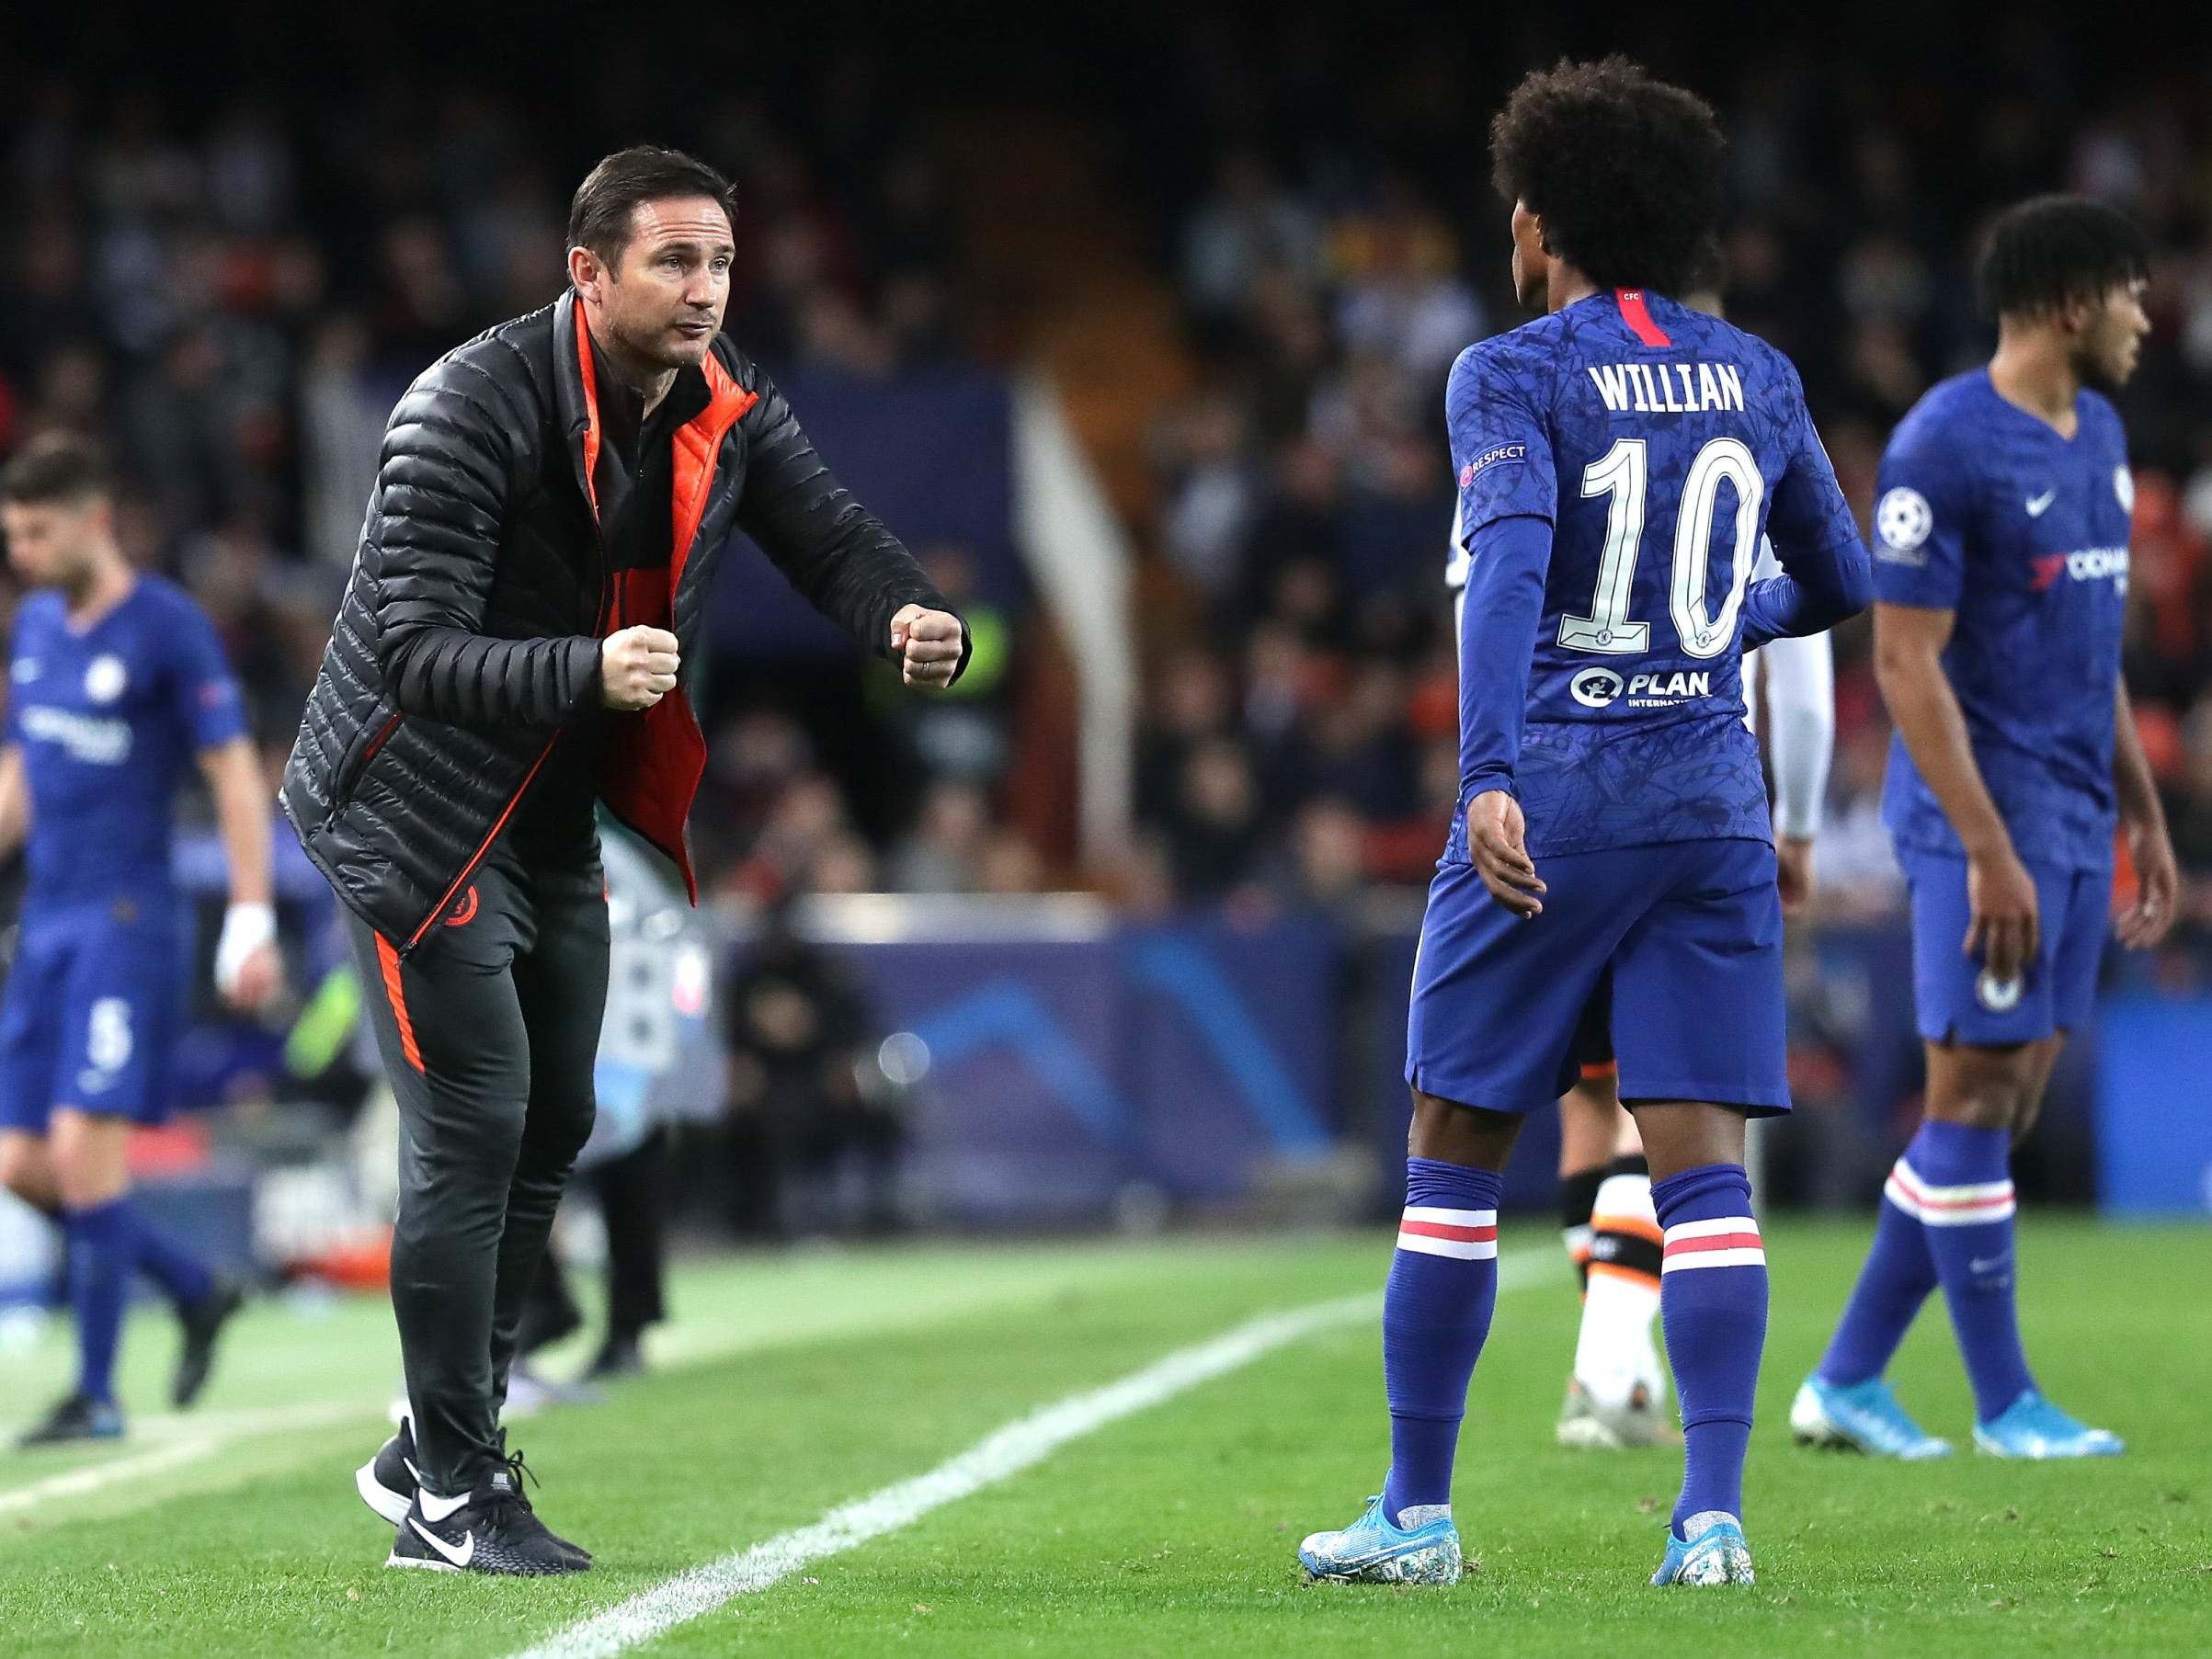 Frank Lampard gives instructions to Willian